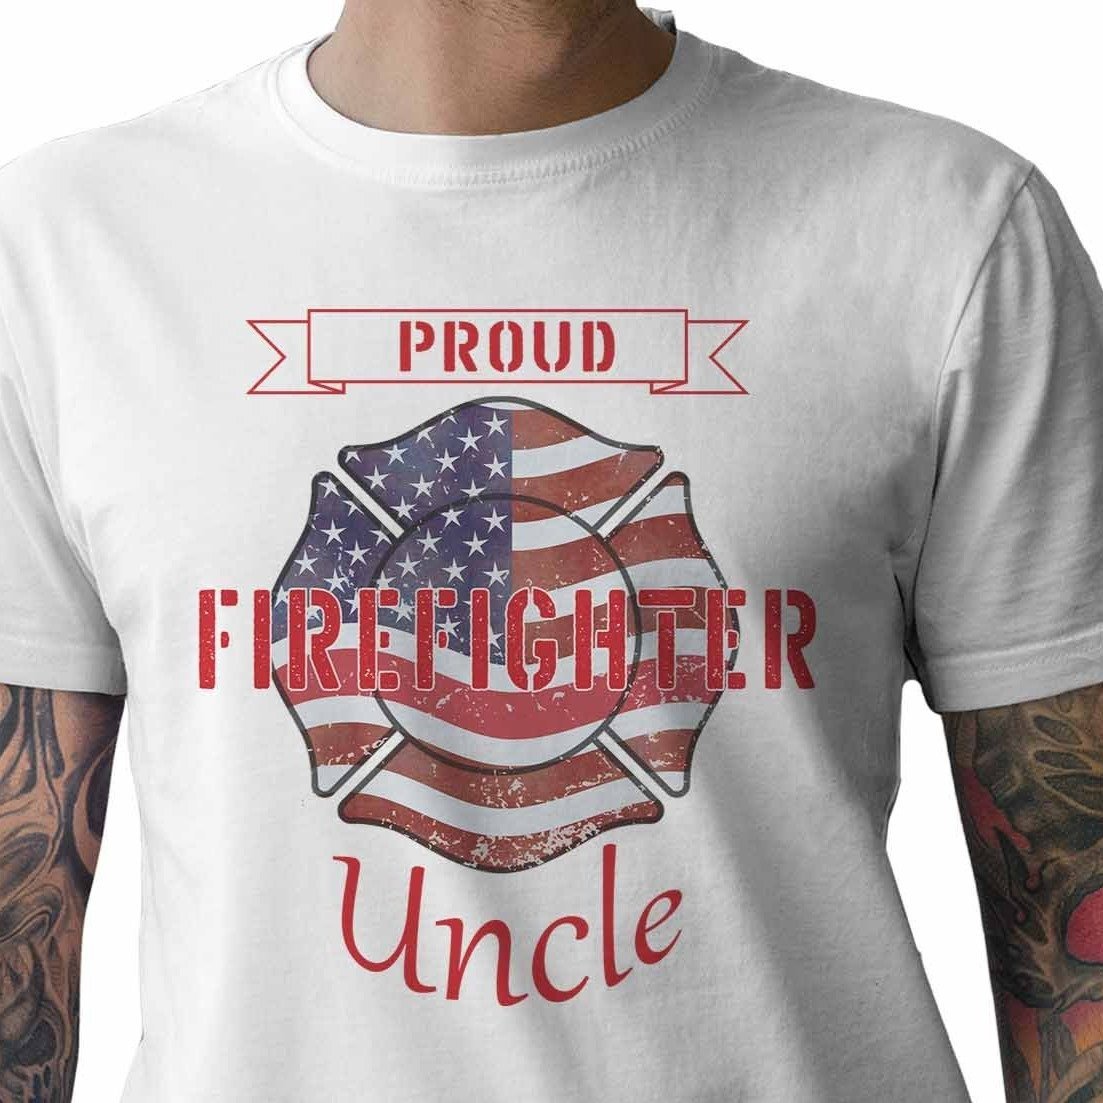 Proud Firefighter Uncle - My Custom Tee Party